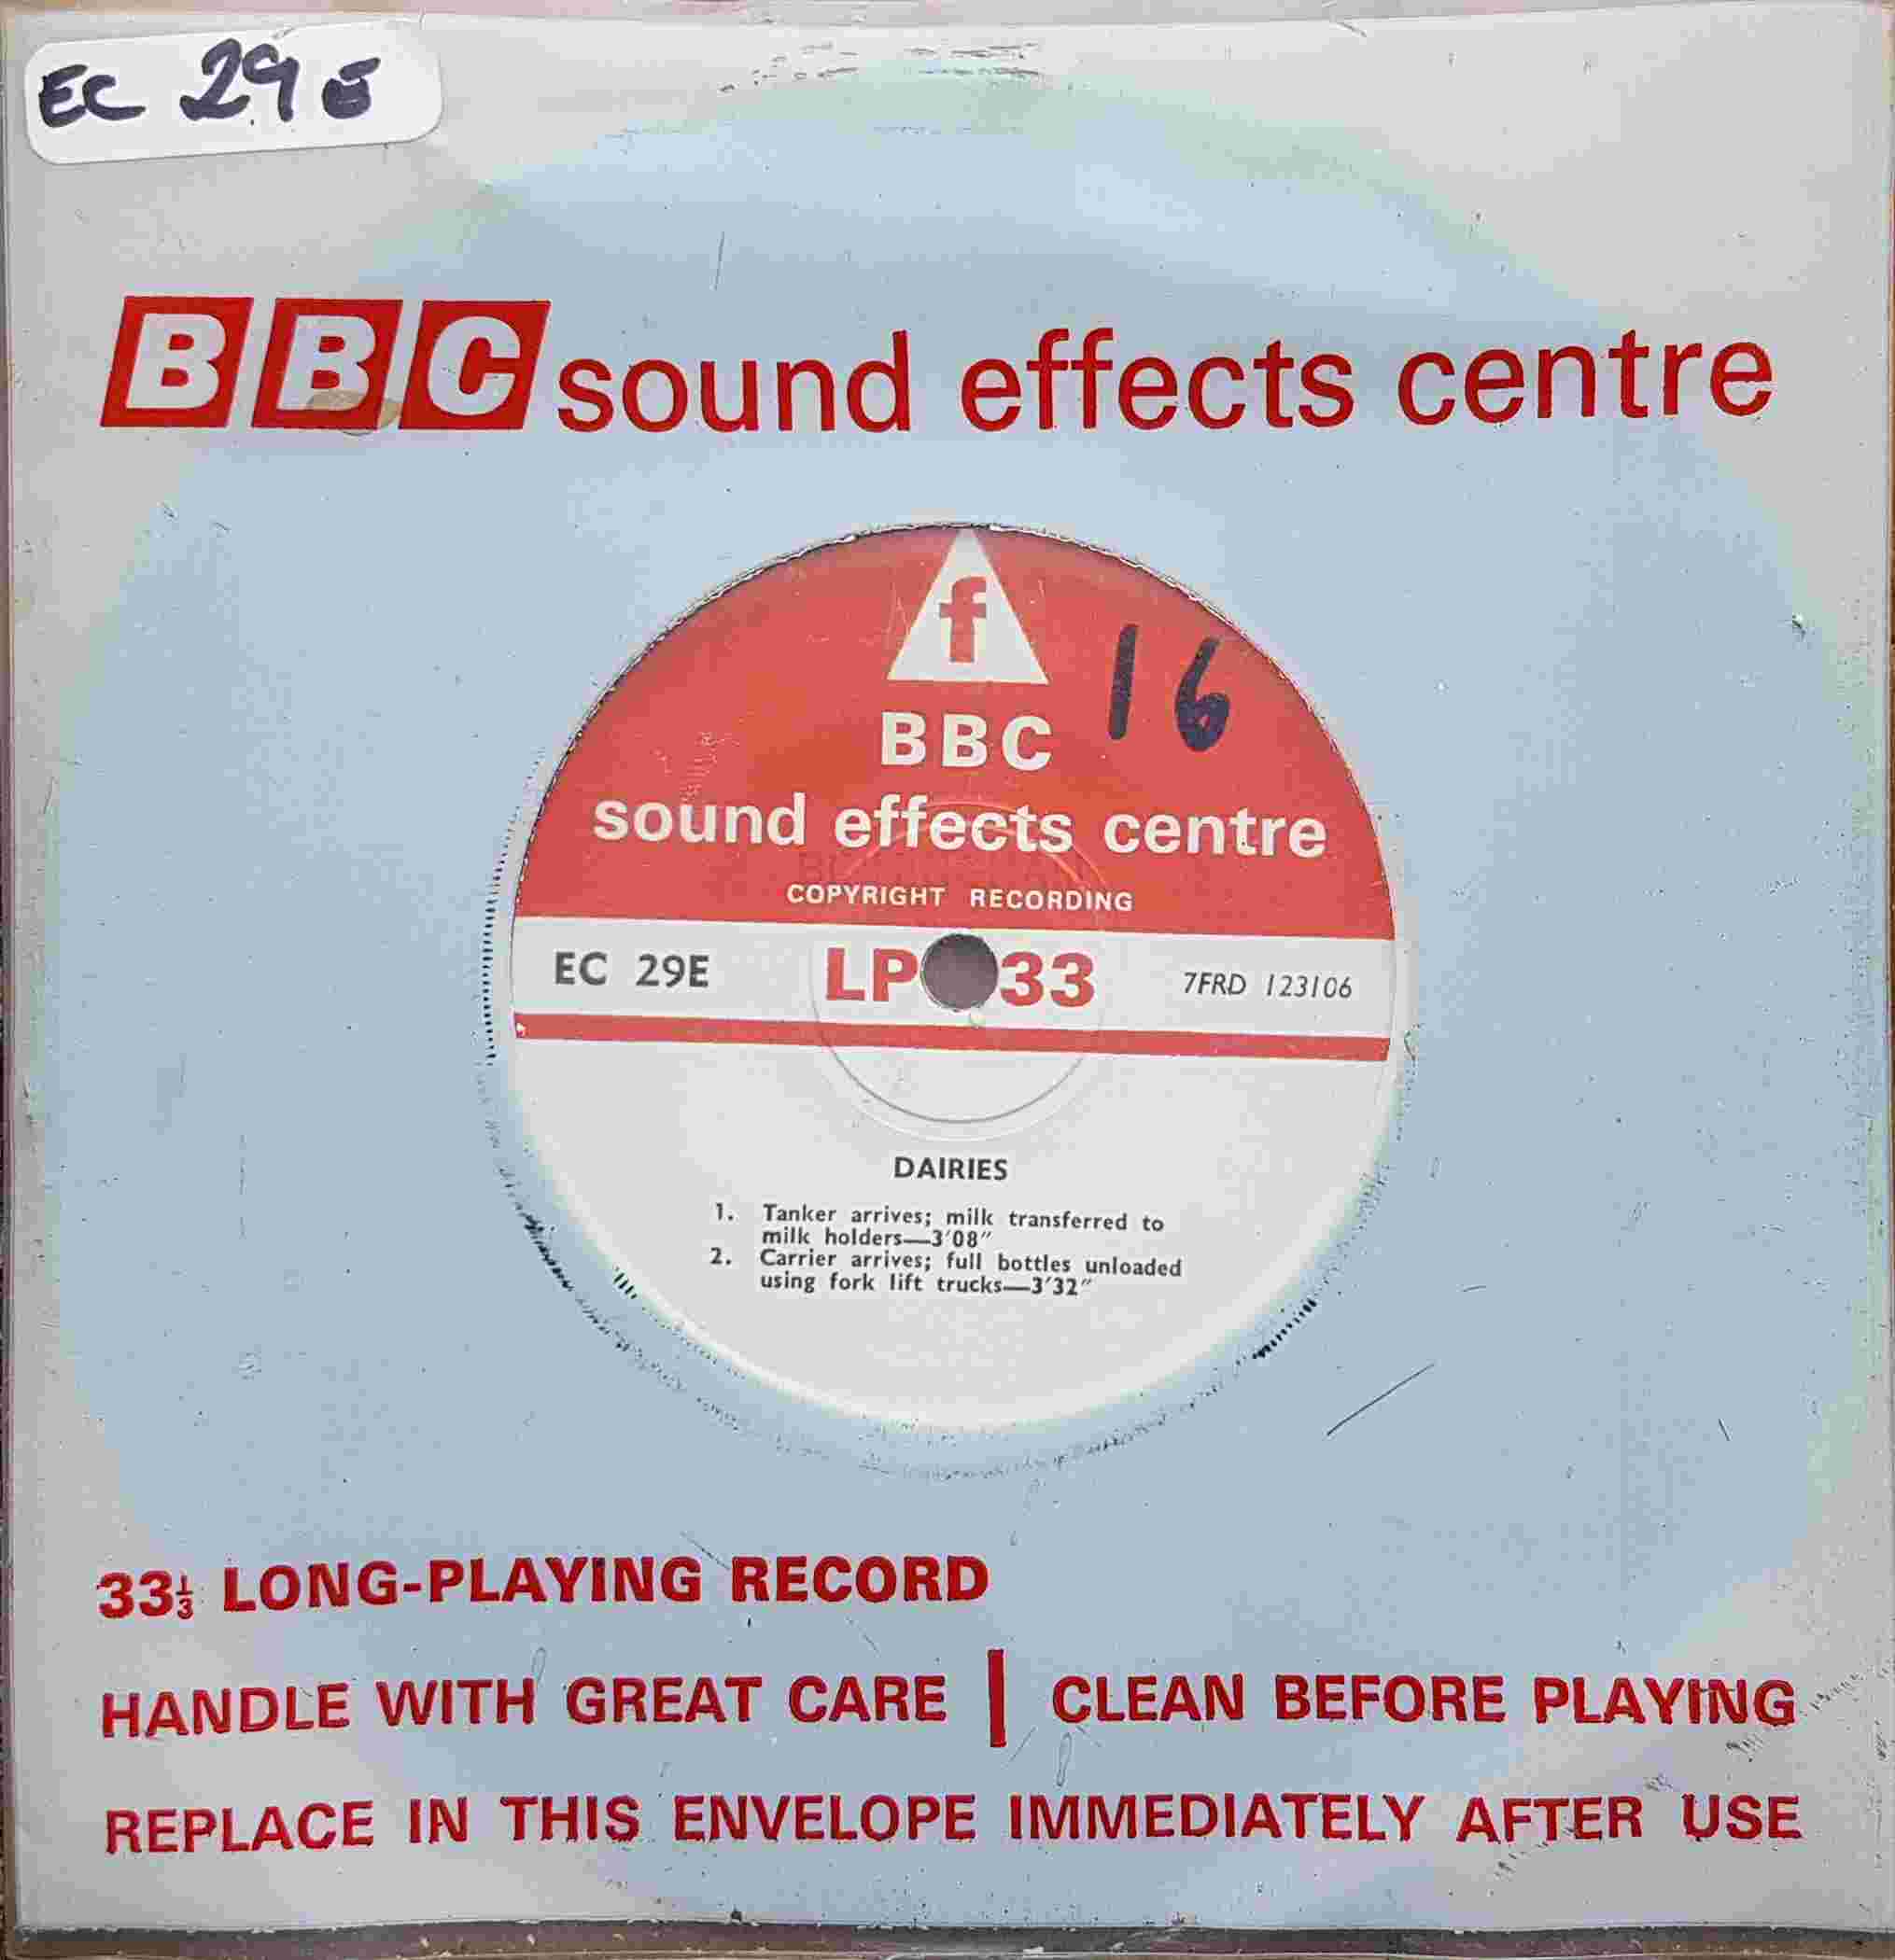 Picture of EC 29E Dairies single by artist Not registered from the BBC records and Tapes library